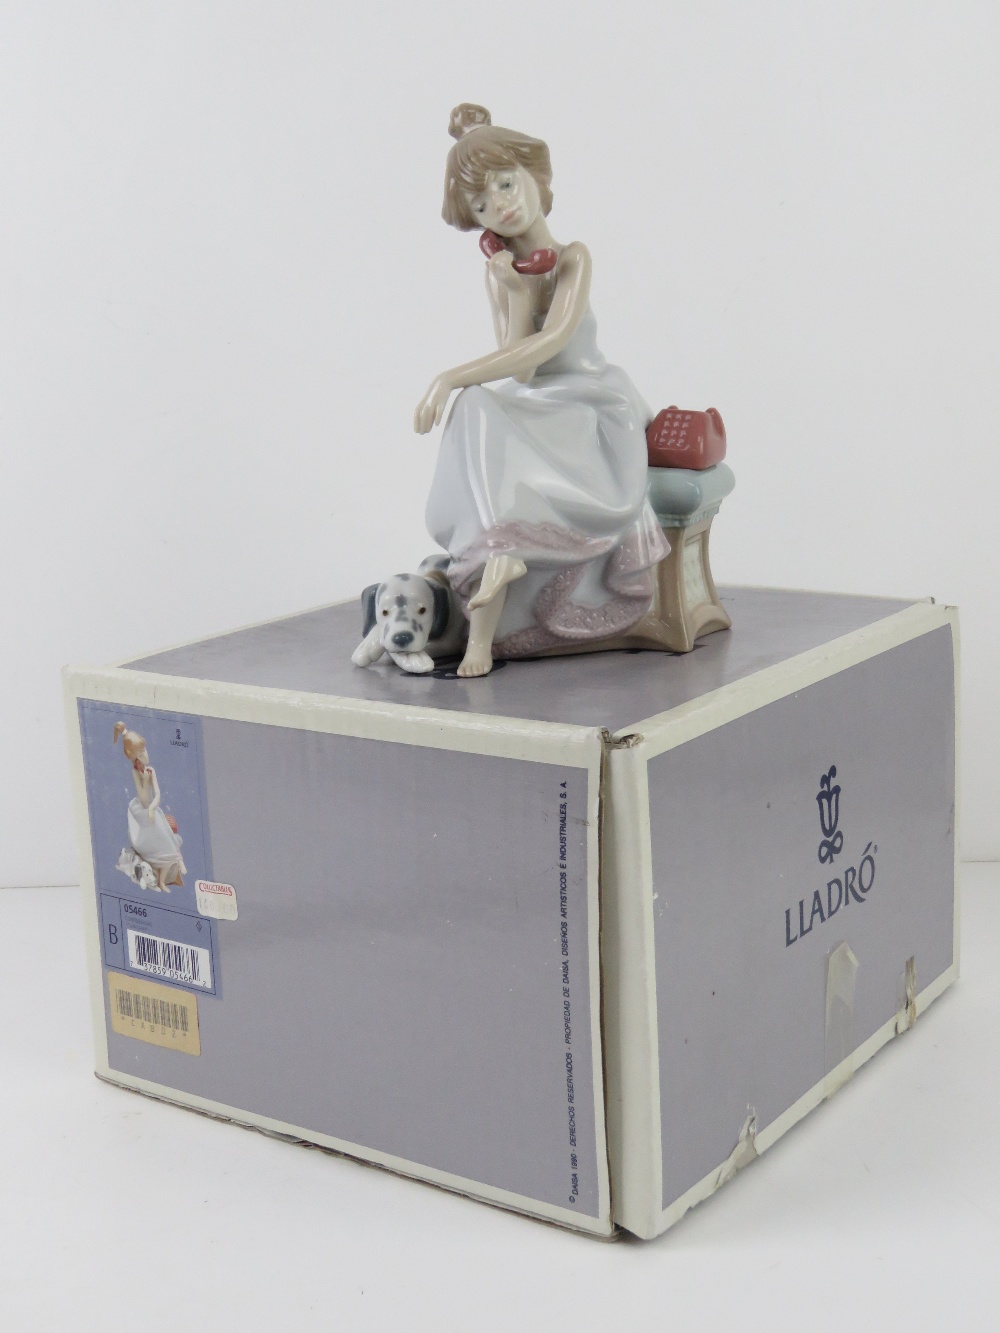 Lladro figurine 5466 'Chit Chat' a girl on the phone with Dalmatian dog at feet, with box, 20. - Image 6 of 6